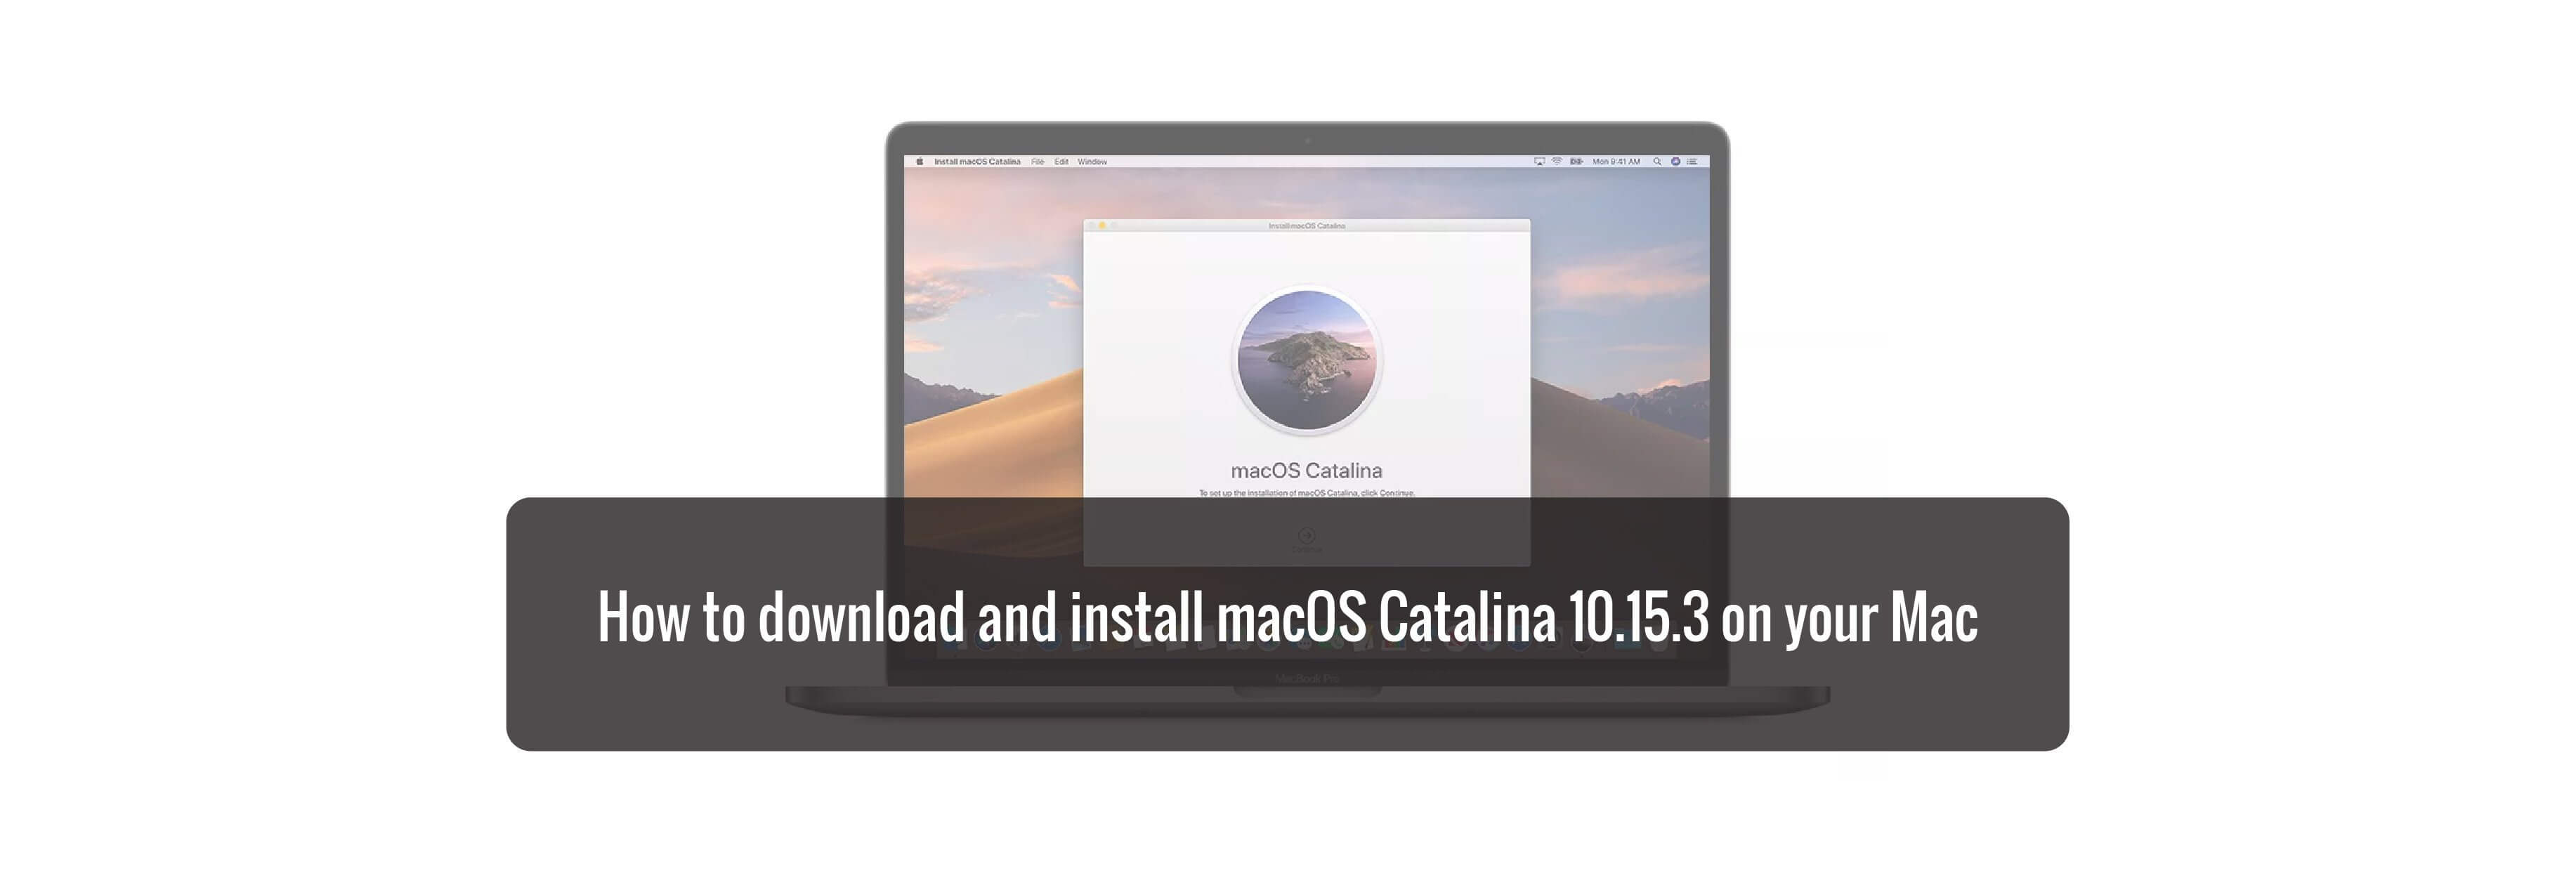 How to download and install macOS Catalina 10.15.3 on your Mac